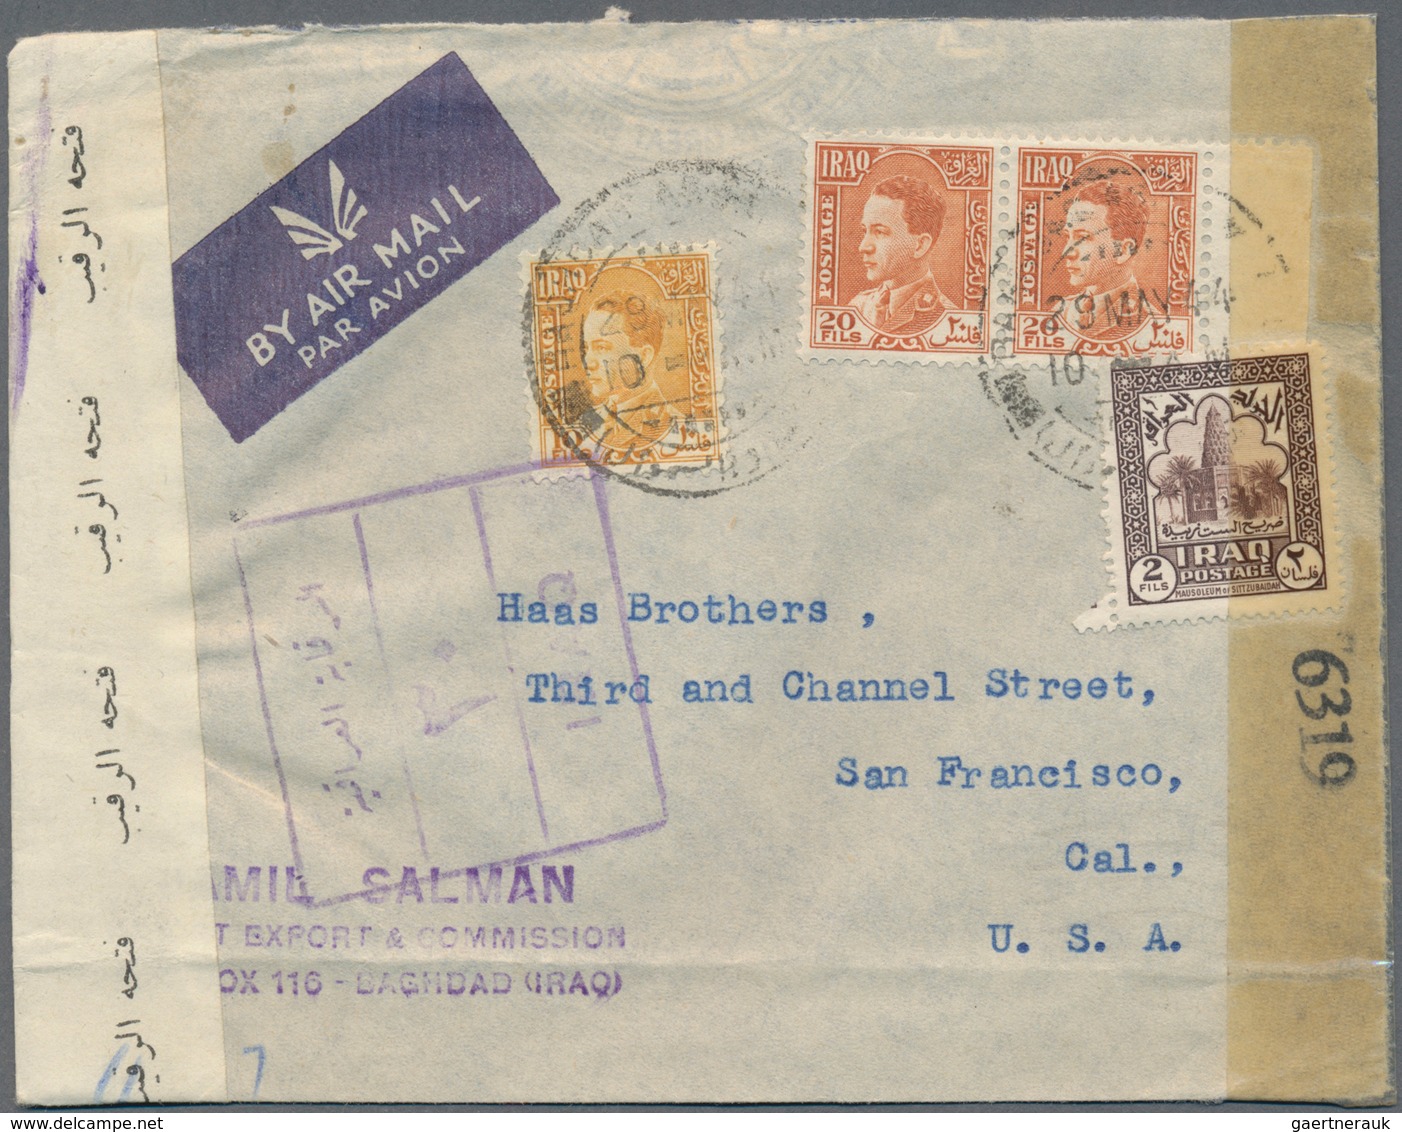 Asien: 1929/81, Near East: Covers/ Mint And Used Stationery Of Jordan (28), Syria (33) And Iraq (17) - Autres - Asie